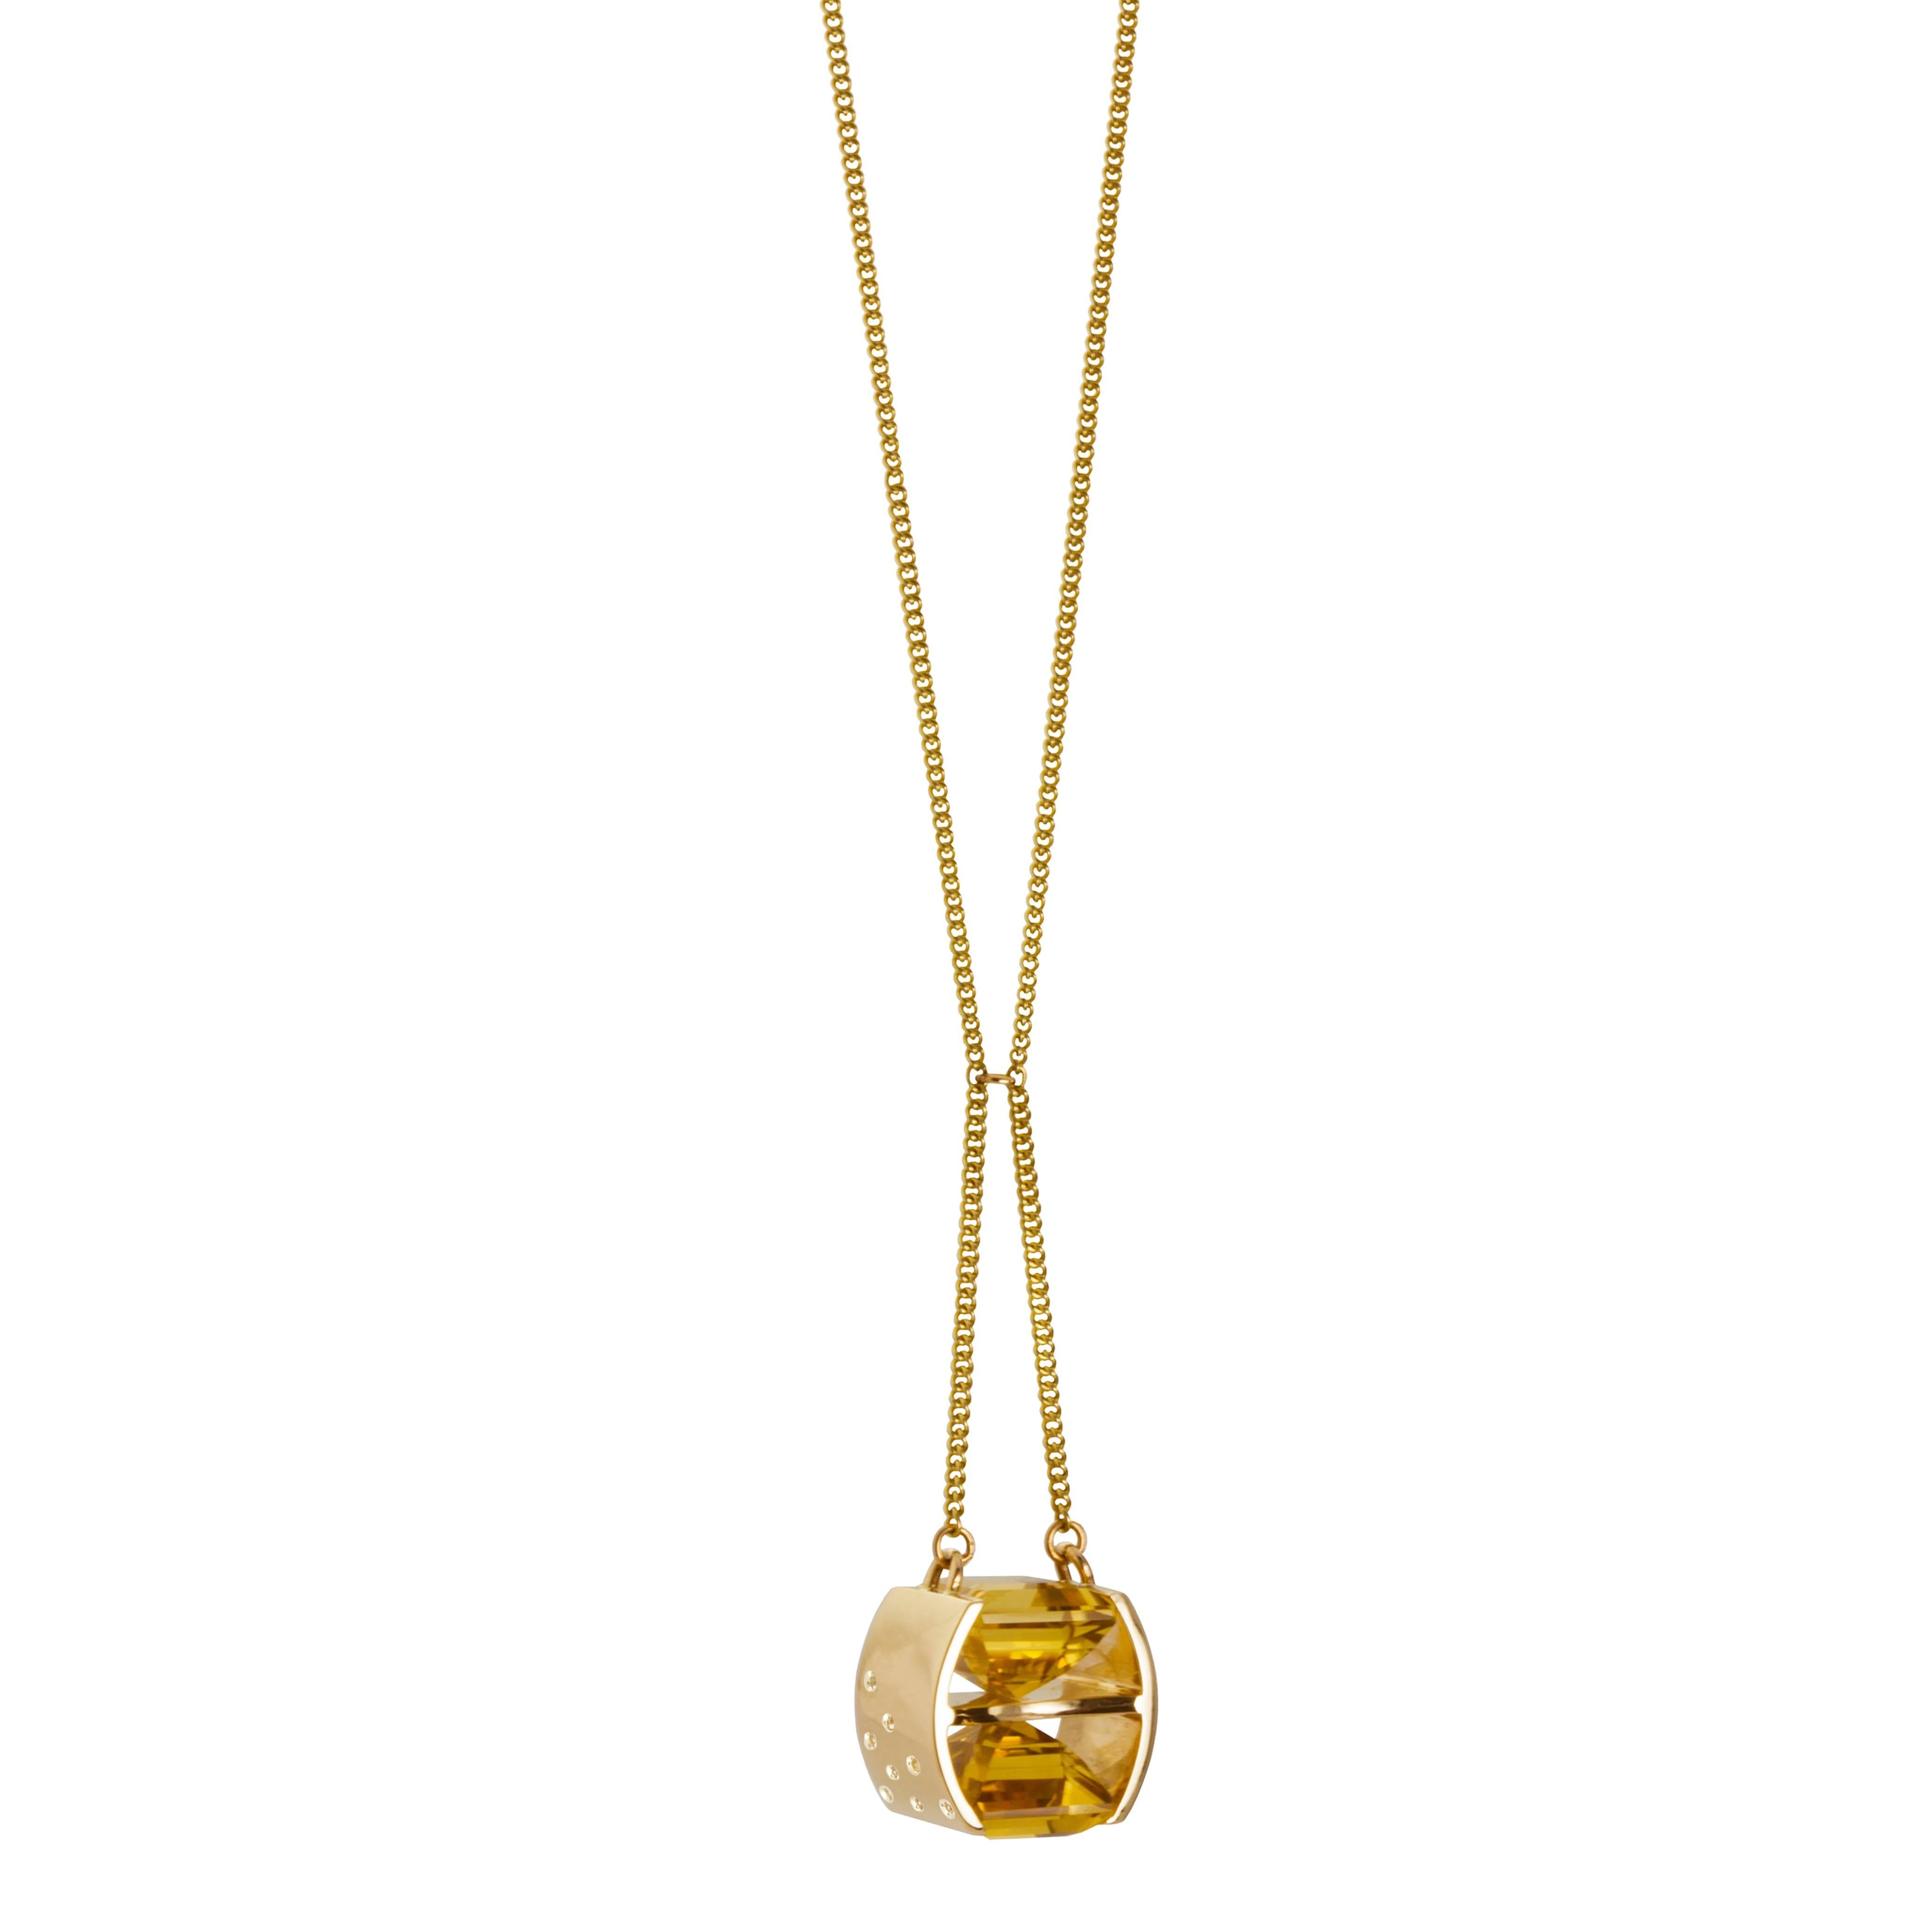 Hyperbola 9 Karat Yellow Gold Necklace by Kattri For Sale